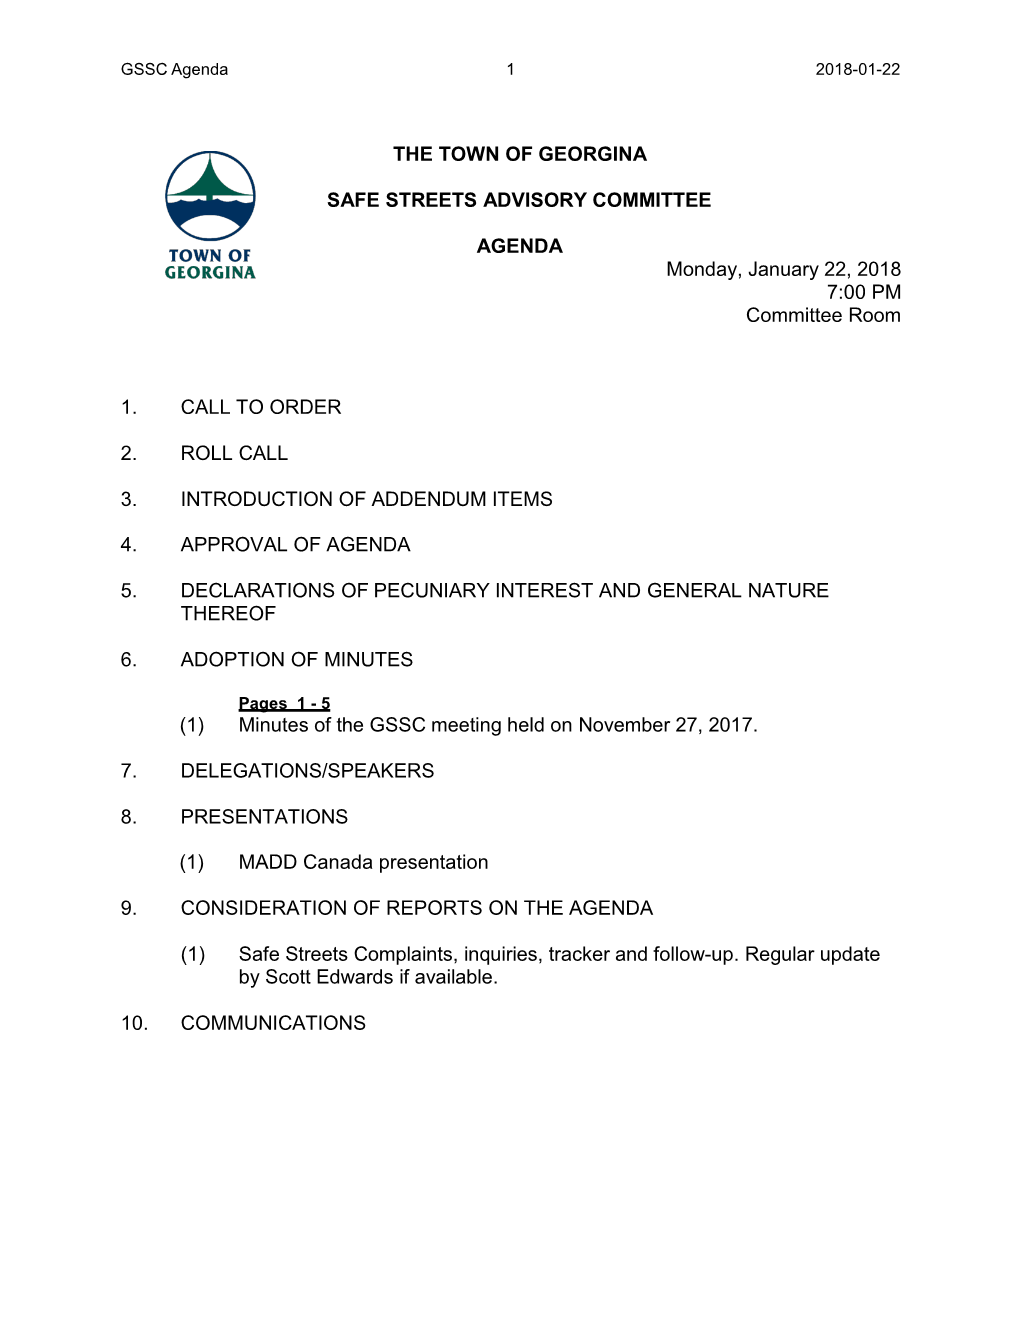 THE TOWN of GEORGINA SAFE STREETS ADVISORY COMMITTEE AGENDA Monday, January 22, 2018 7:00 PM Committee Room 1. CALL to ORDER 2